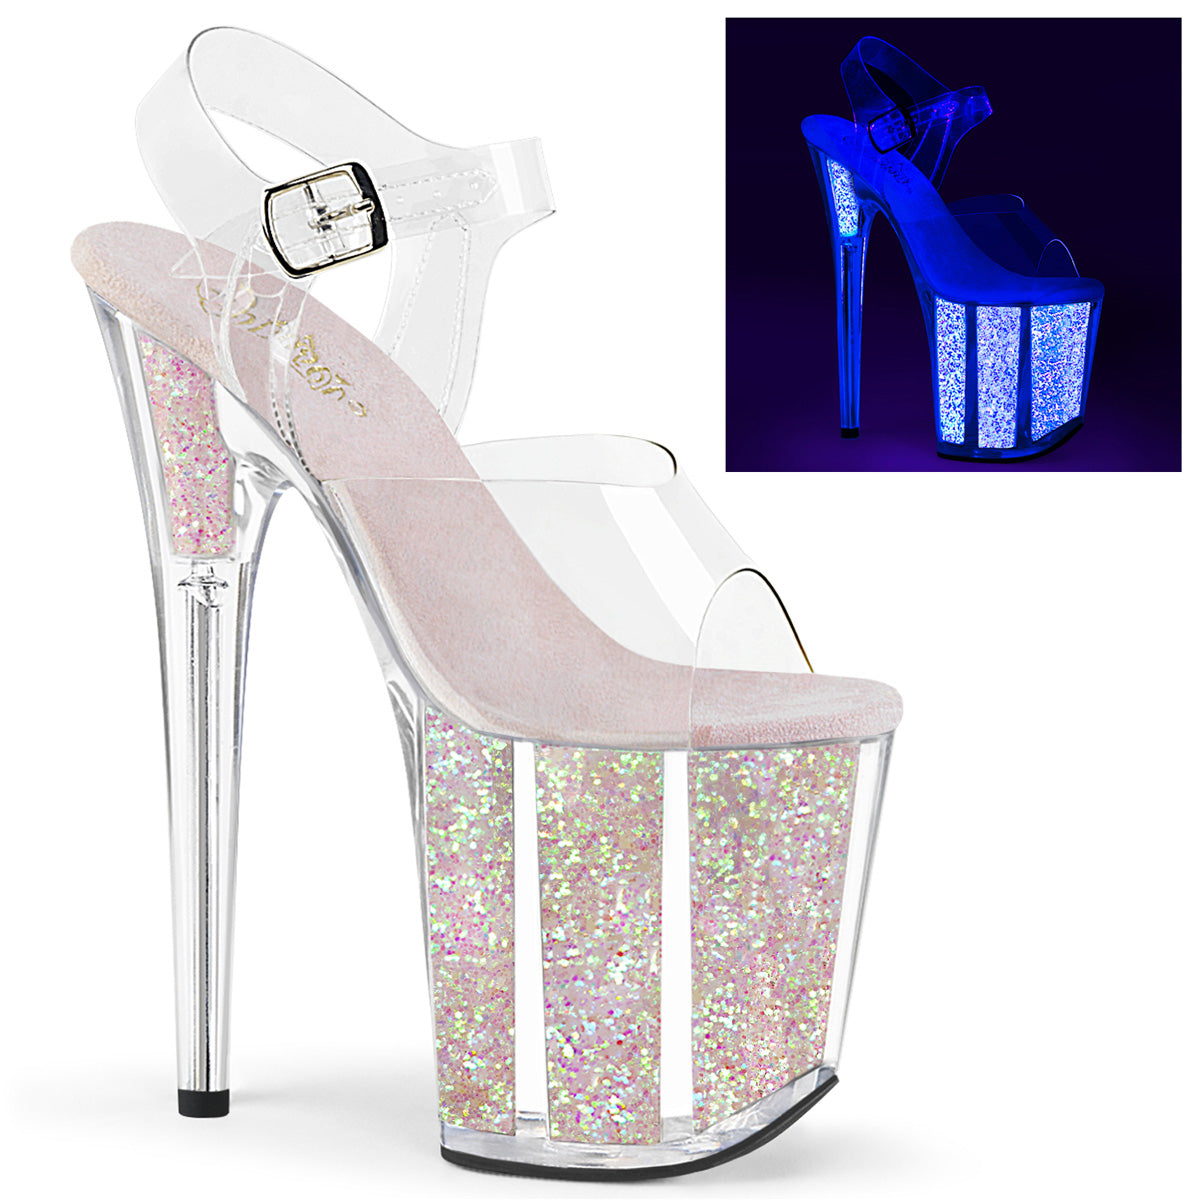 Flamingo-808uvg 8 "Heel Clear Neon Glitter Strippers Shoes